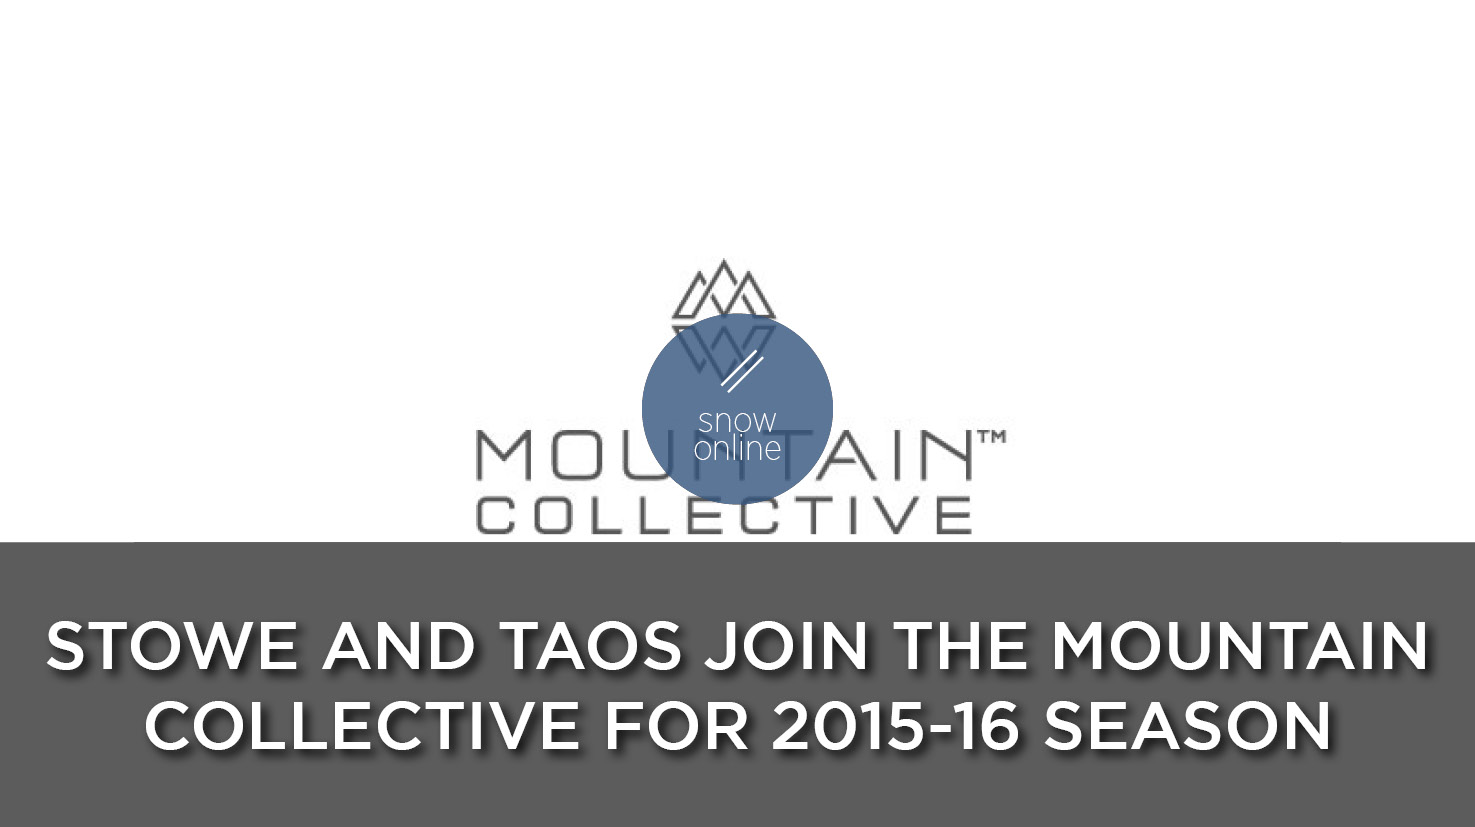 Stowe And Taos Join The Mountain Collective For 2015-16 Season